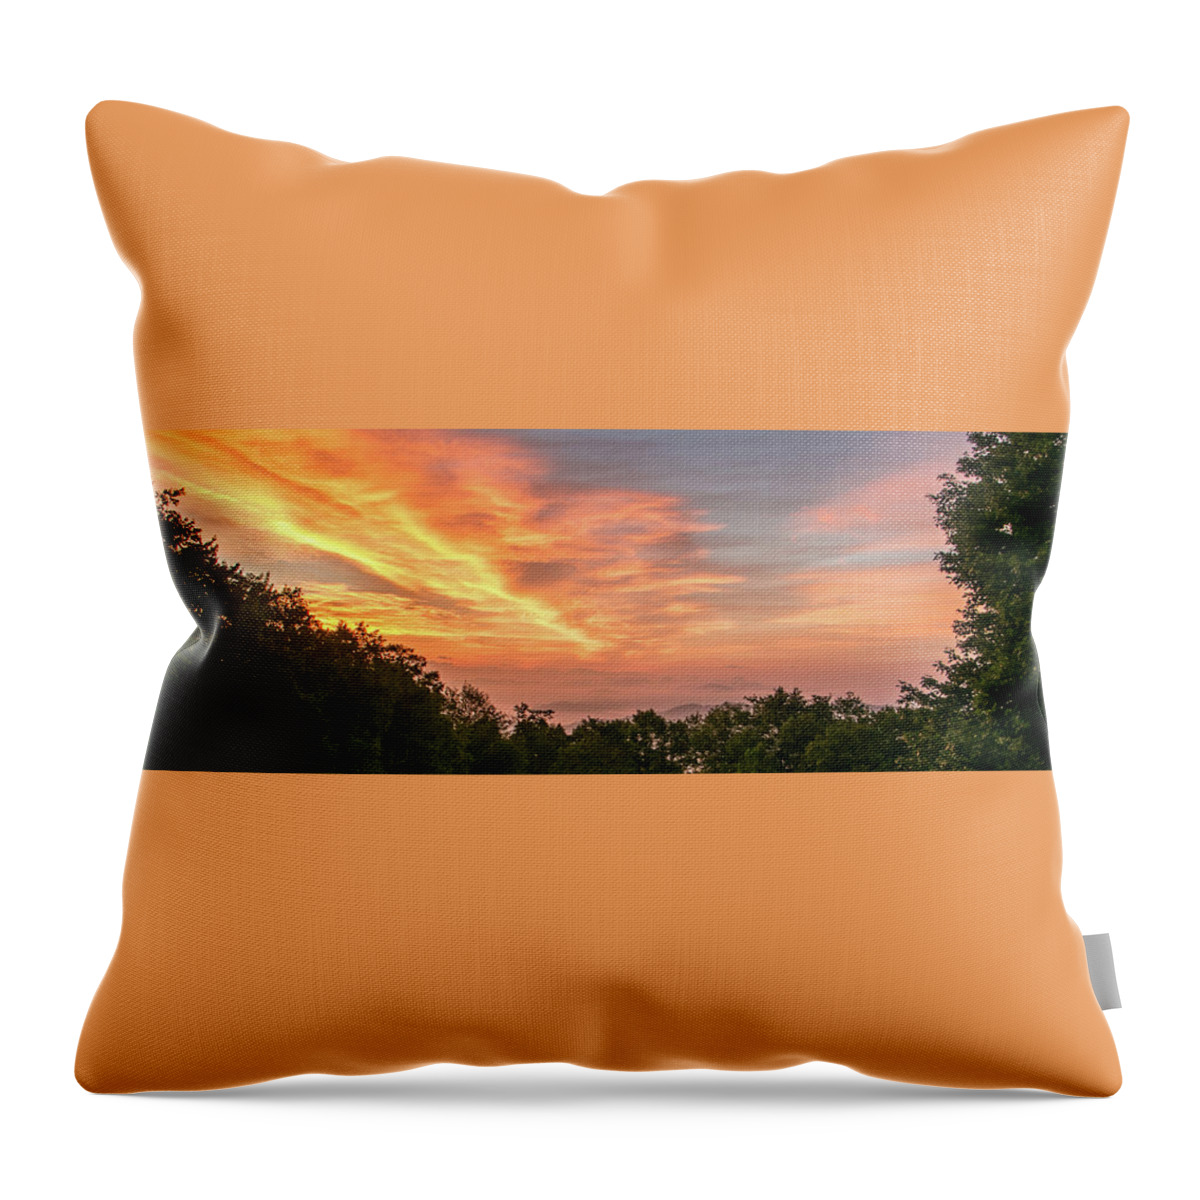 Sunrise Throw Pillow featuring the photograph Sunrise July 22 2015 by D K Wall